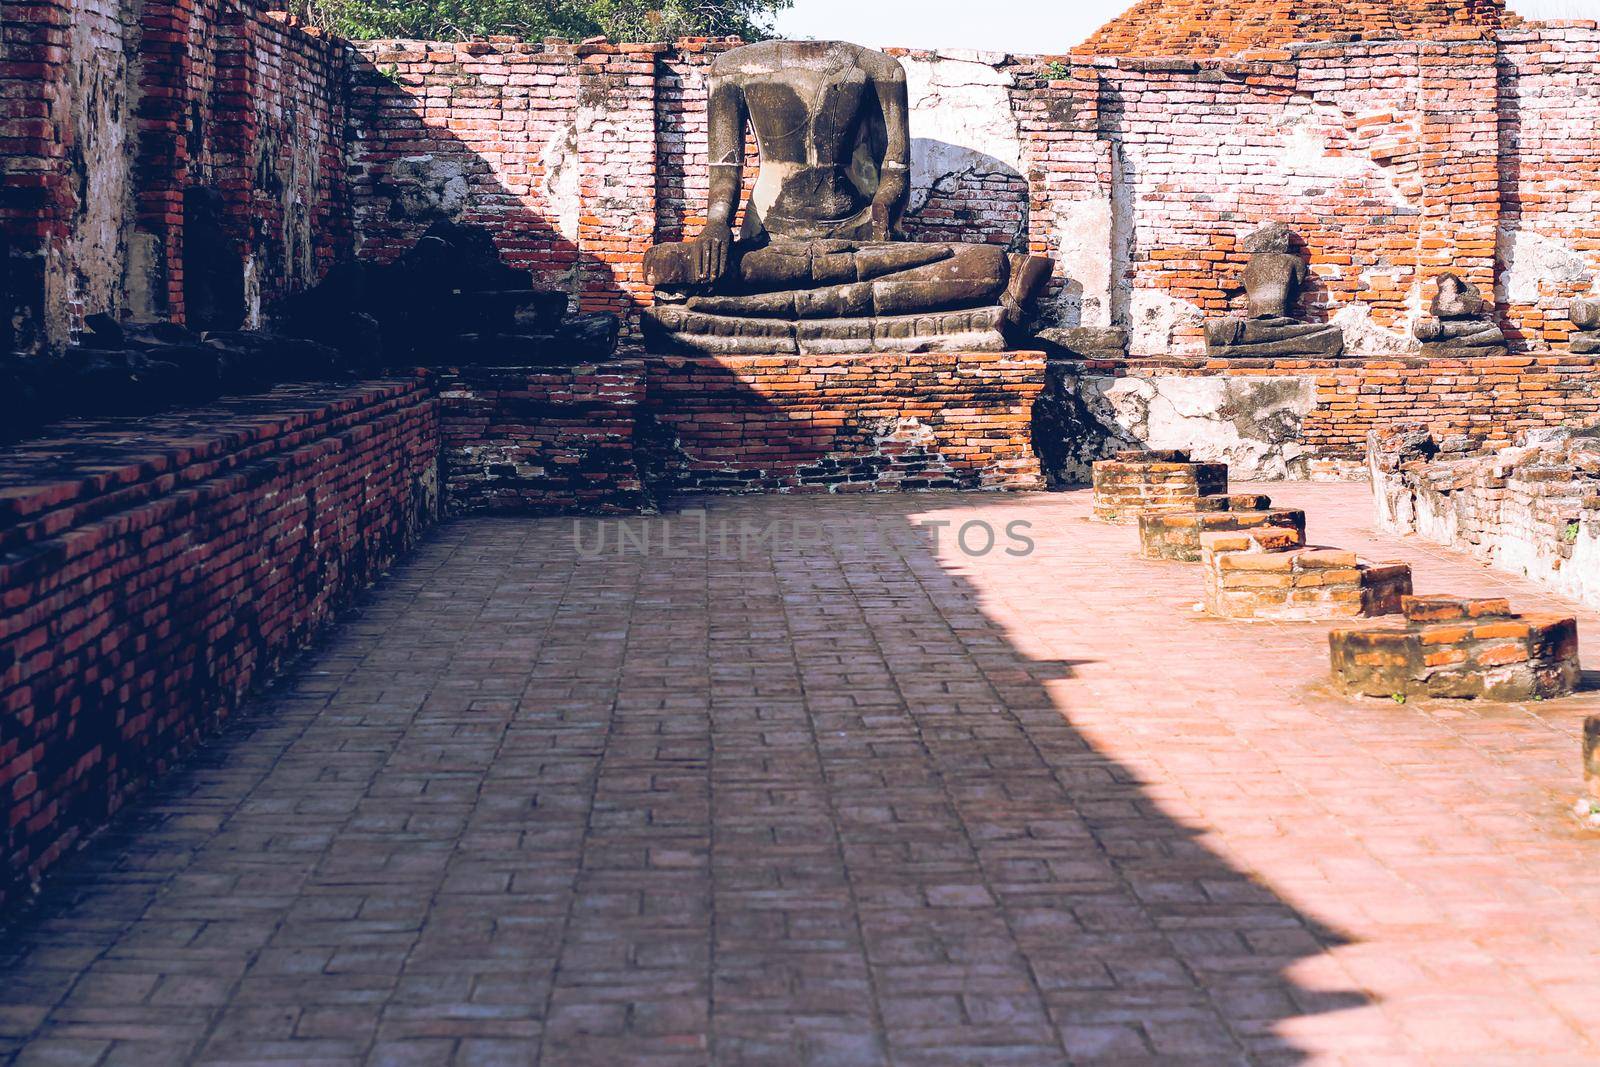 Remnants of the ancient ruins of Wat Chaiwatthanaram by Sonnet15